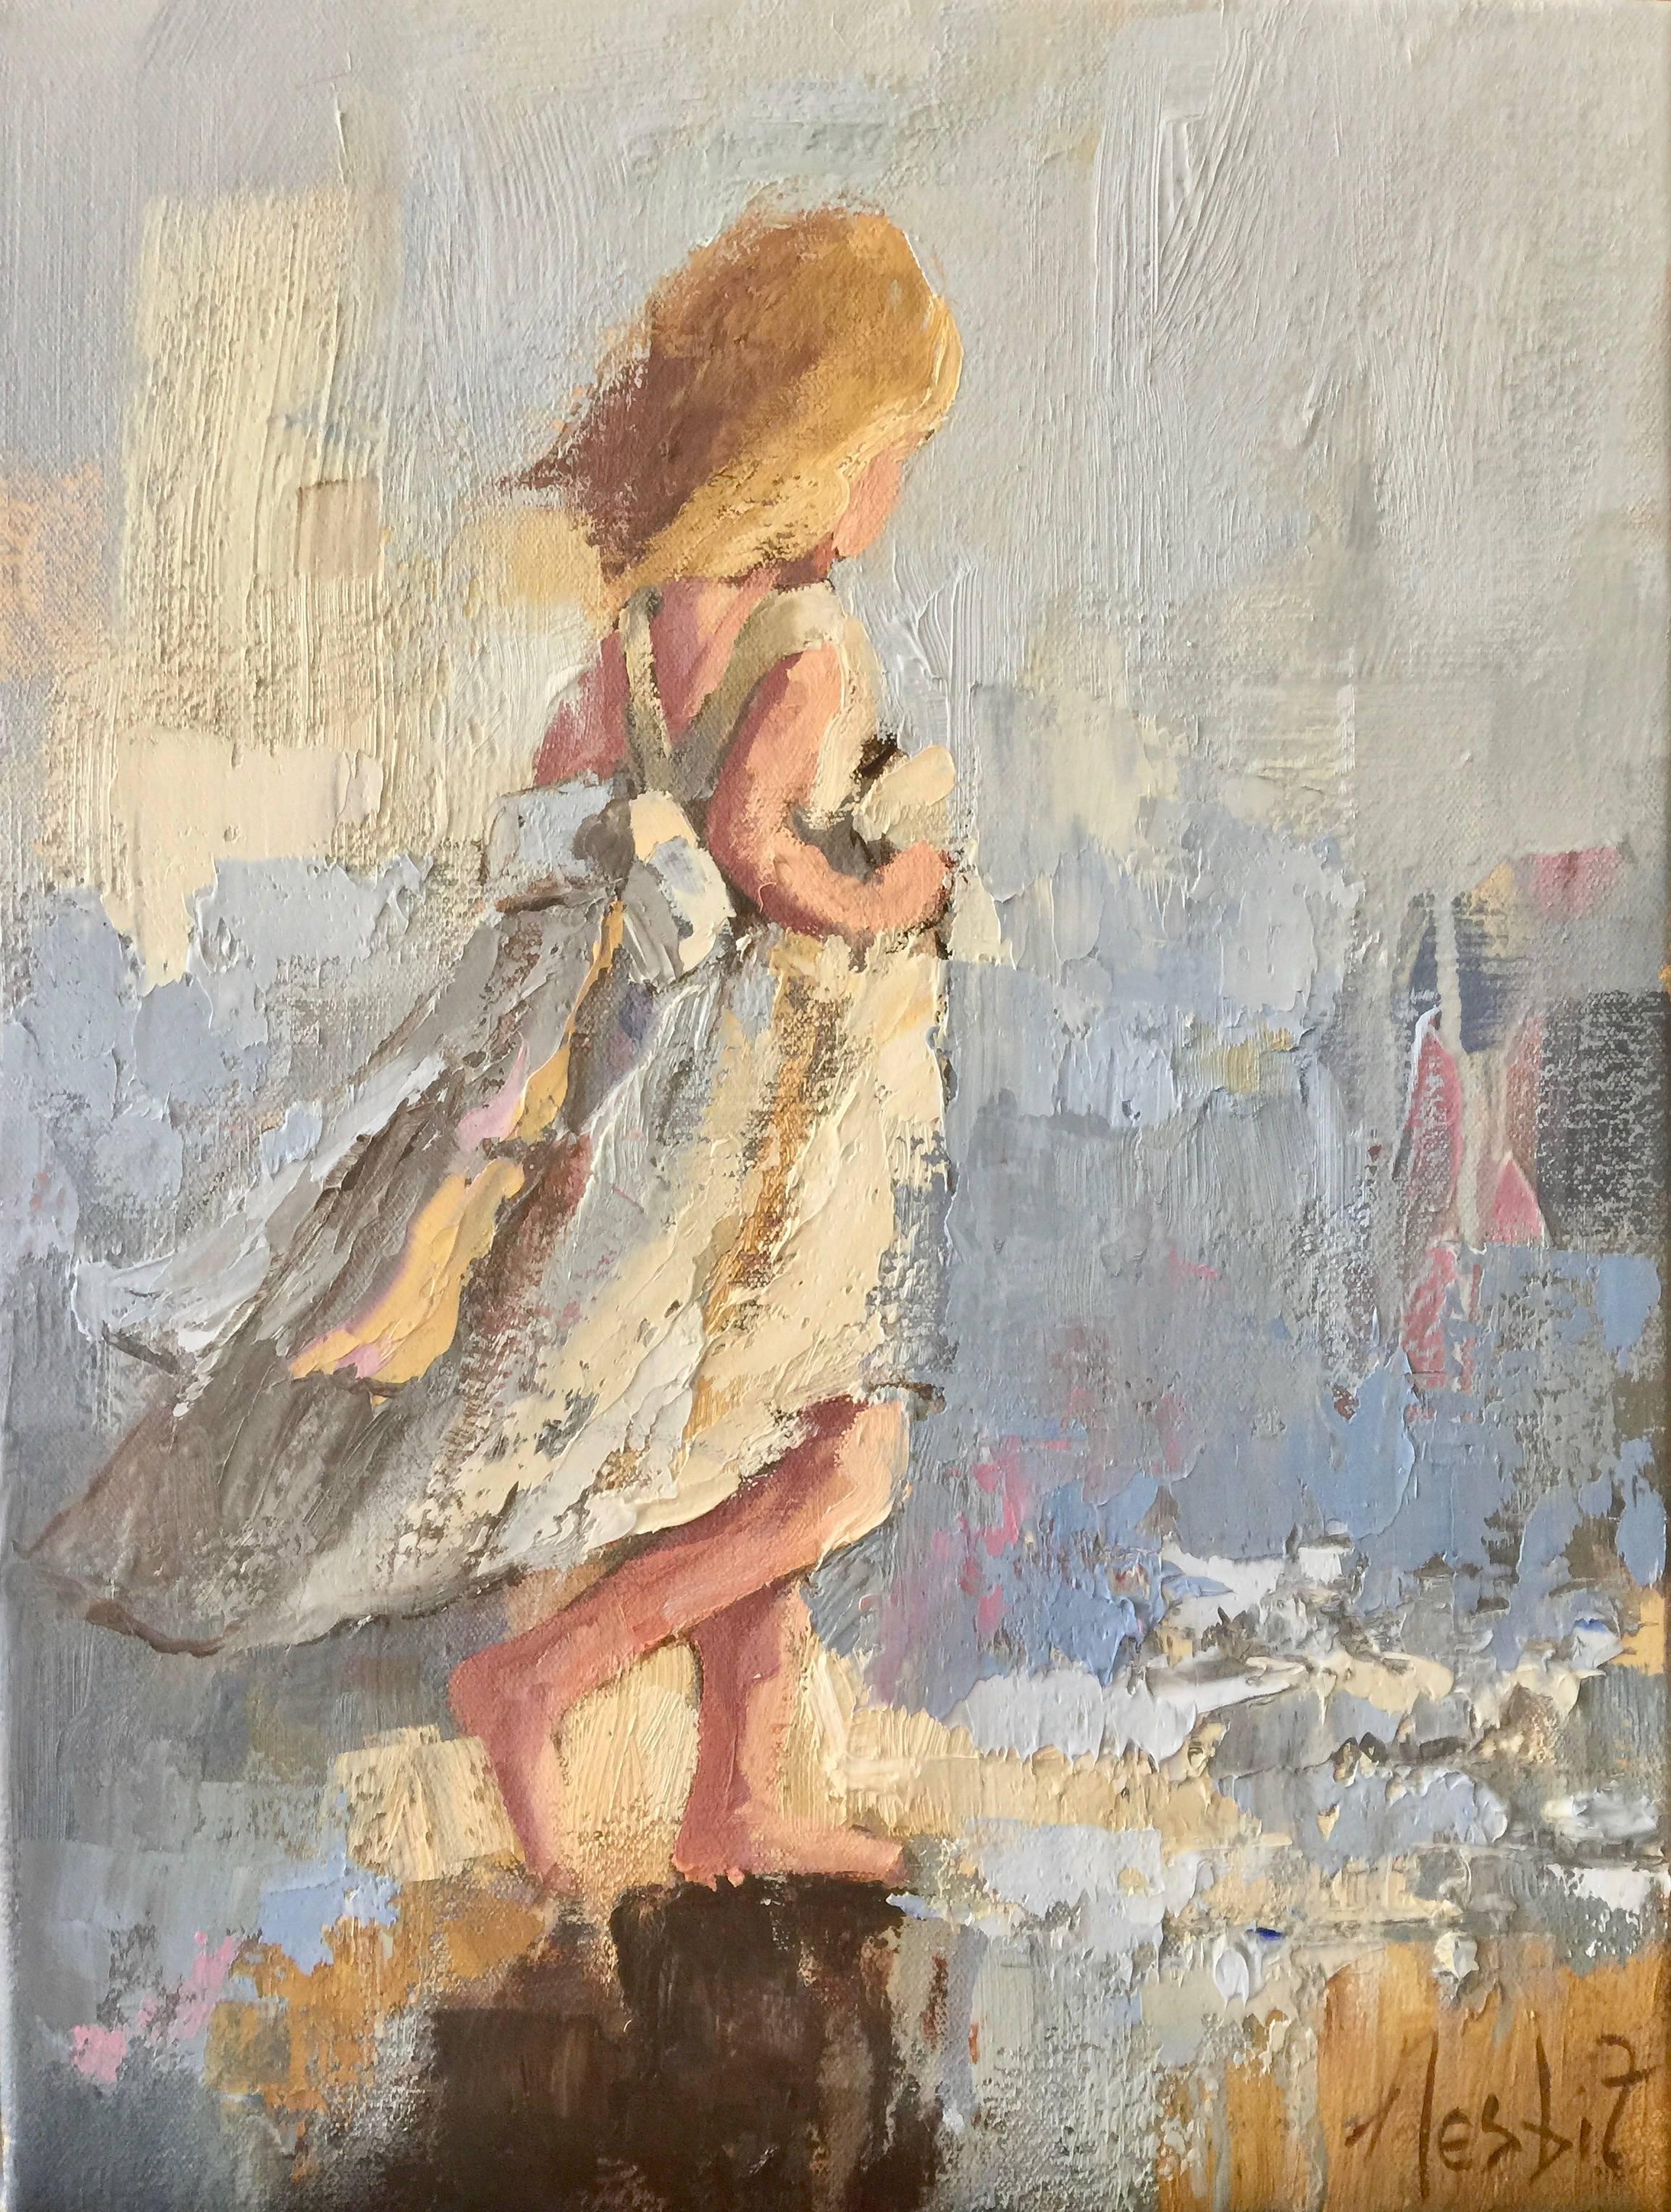 Angela Nesbit Figurative Painting - 'Easy Days', Small Vertical Impressionist Figurative Oil on Canvas Painting